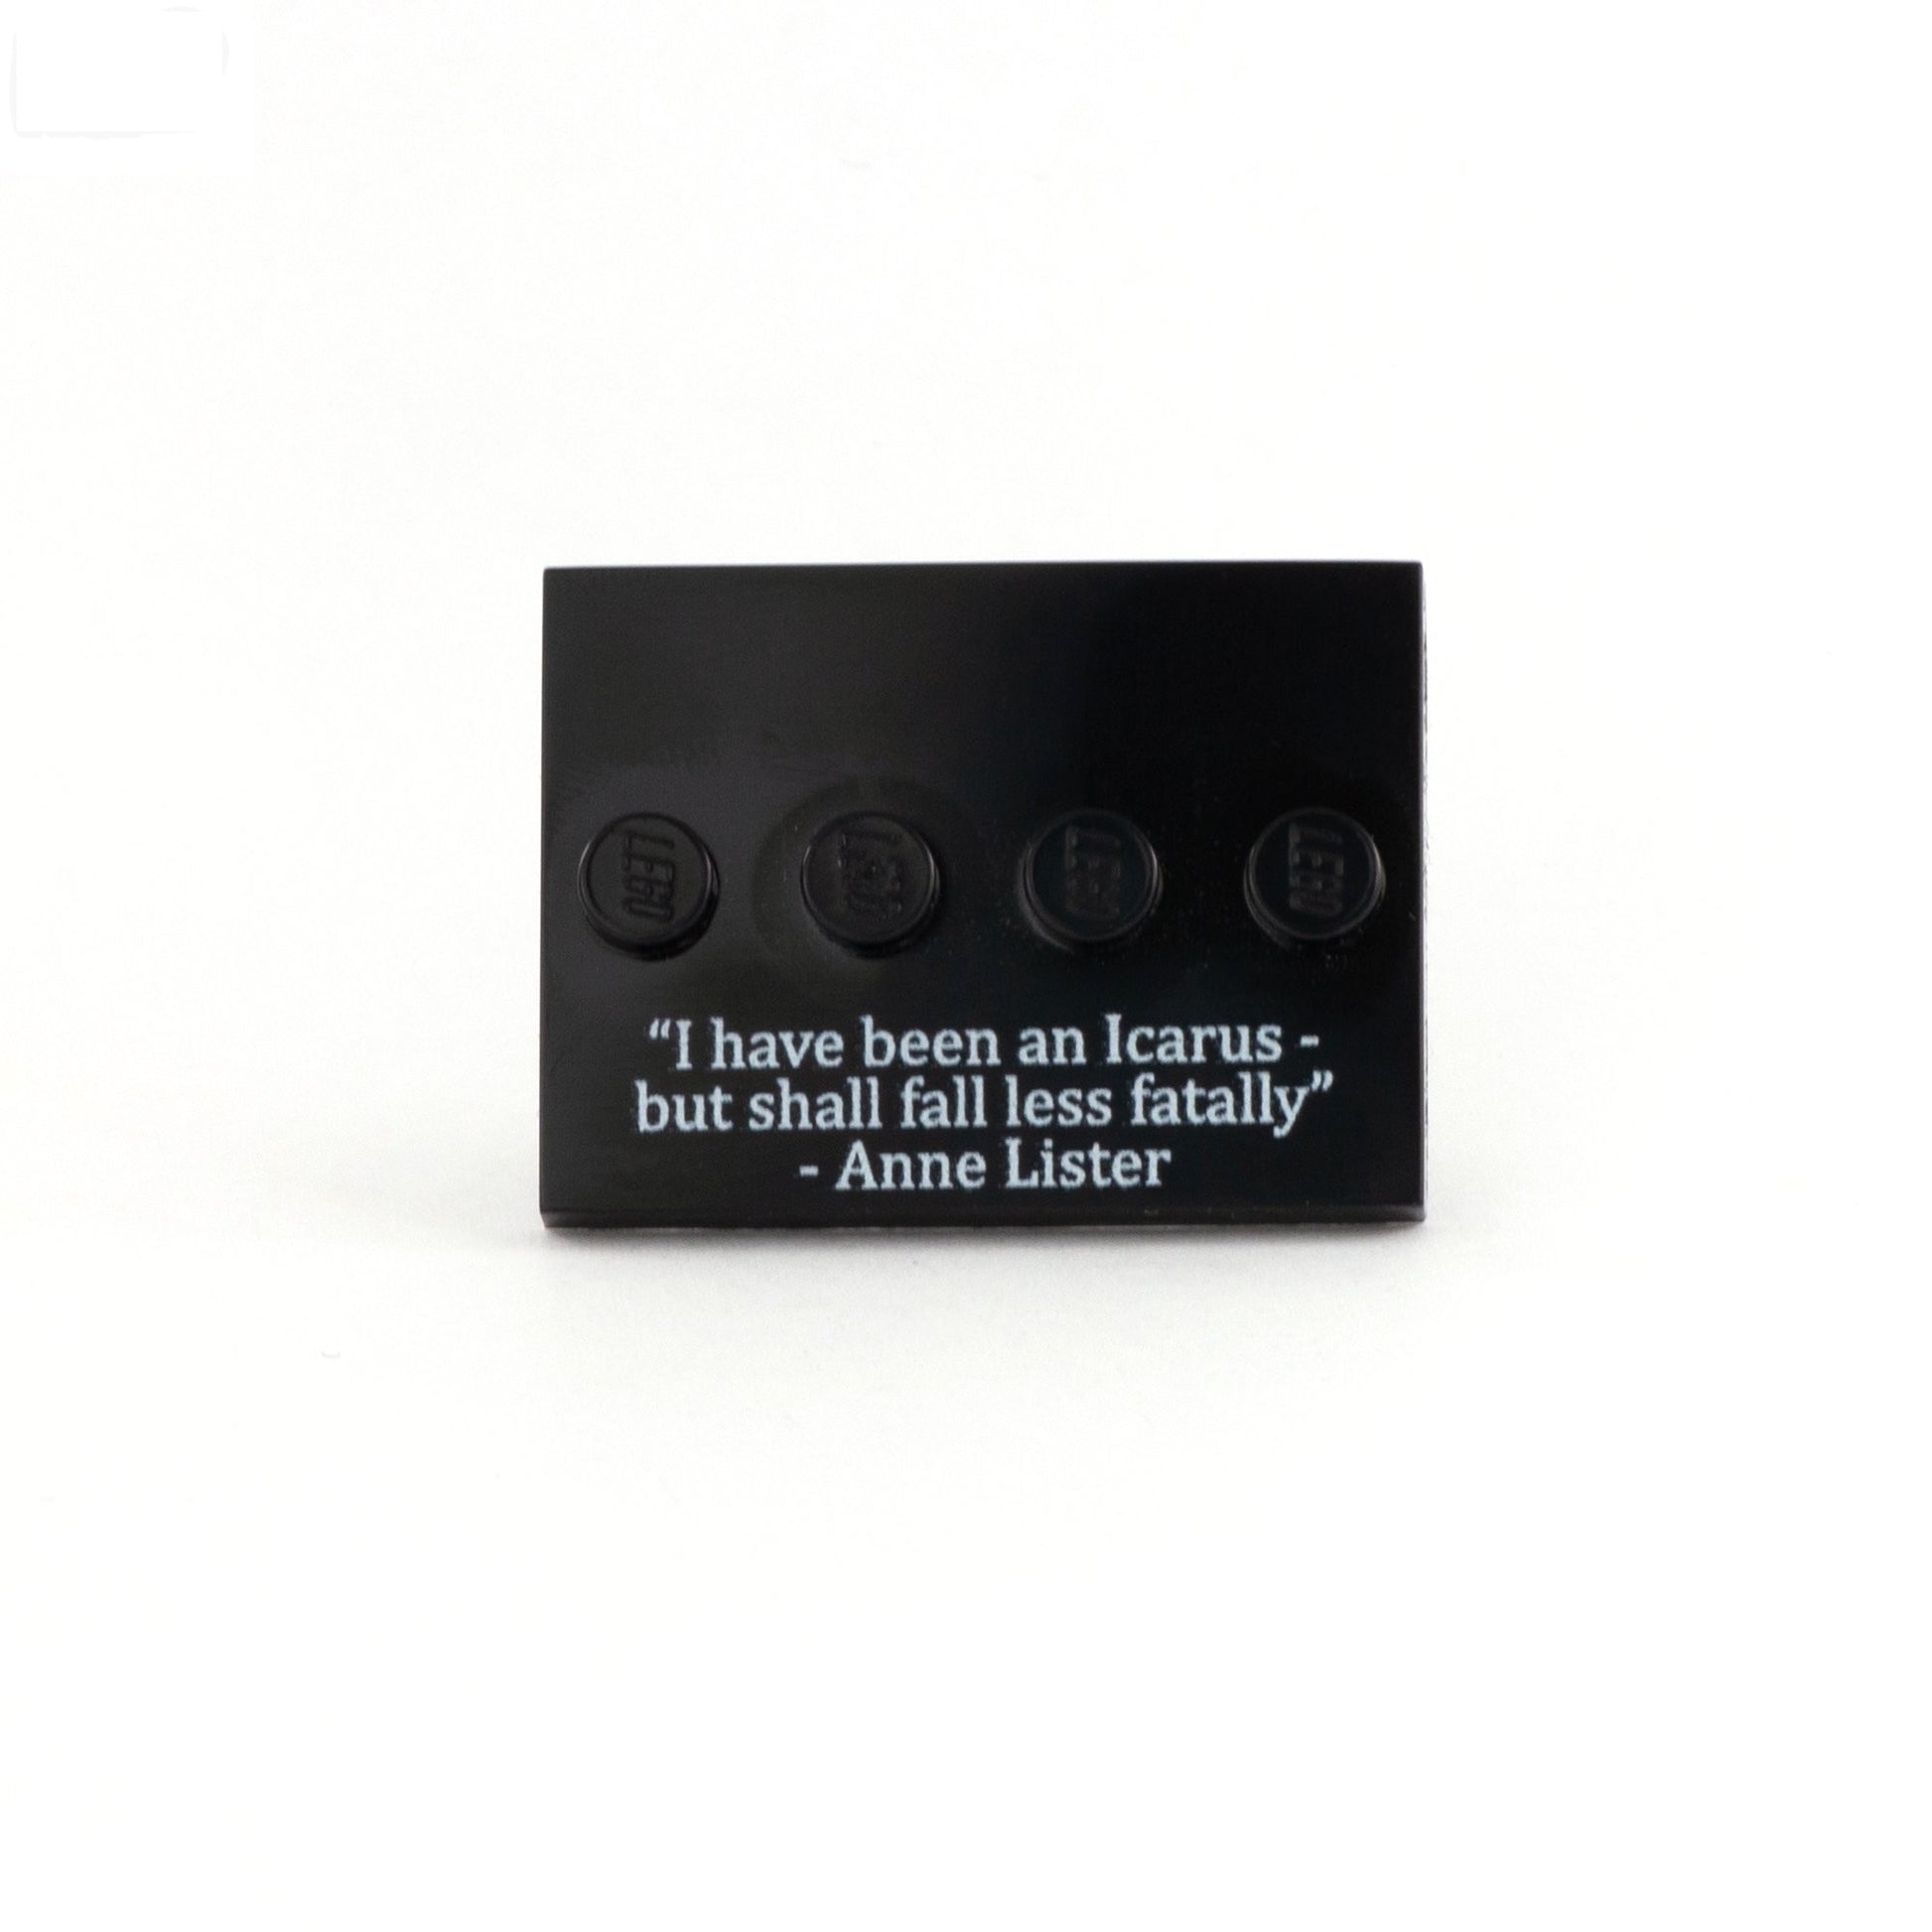 Anne Lister quote - Custom LEGO Minifigure Baseplate